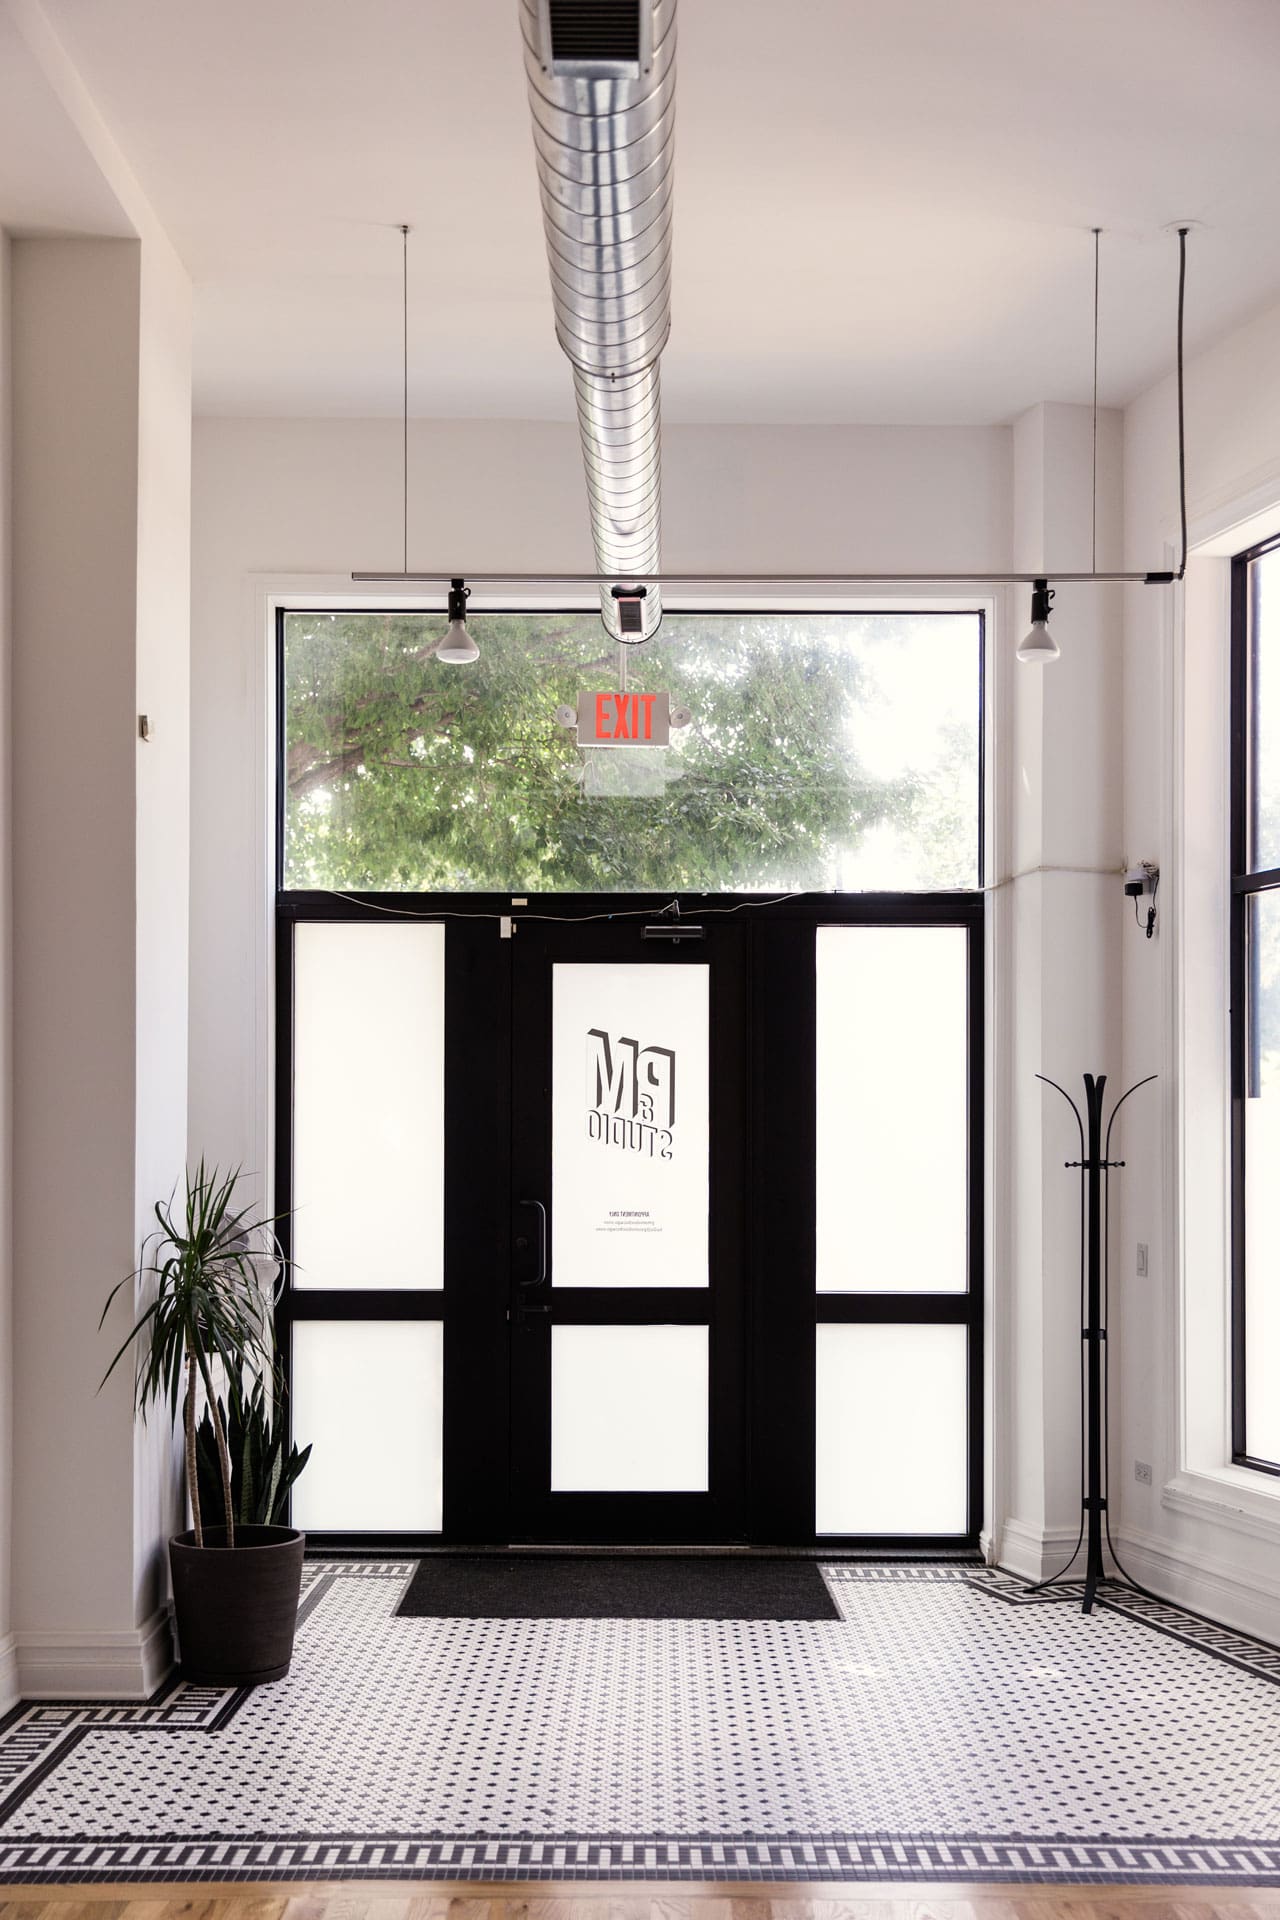 Entryway to Chicago photography studio P&M Studio featuring natural light and black and white tile floor